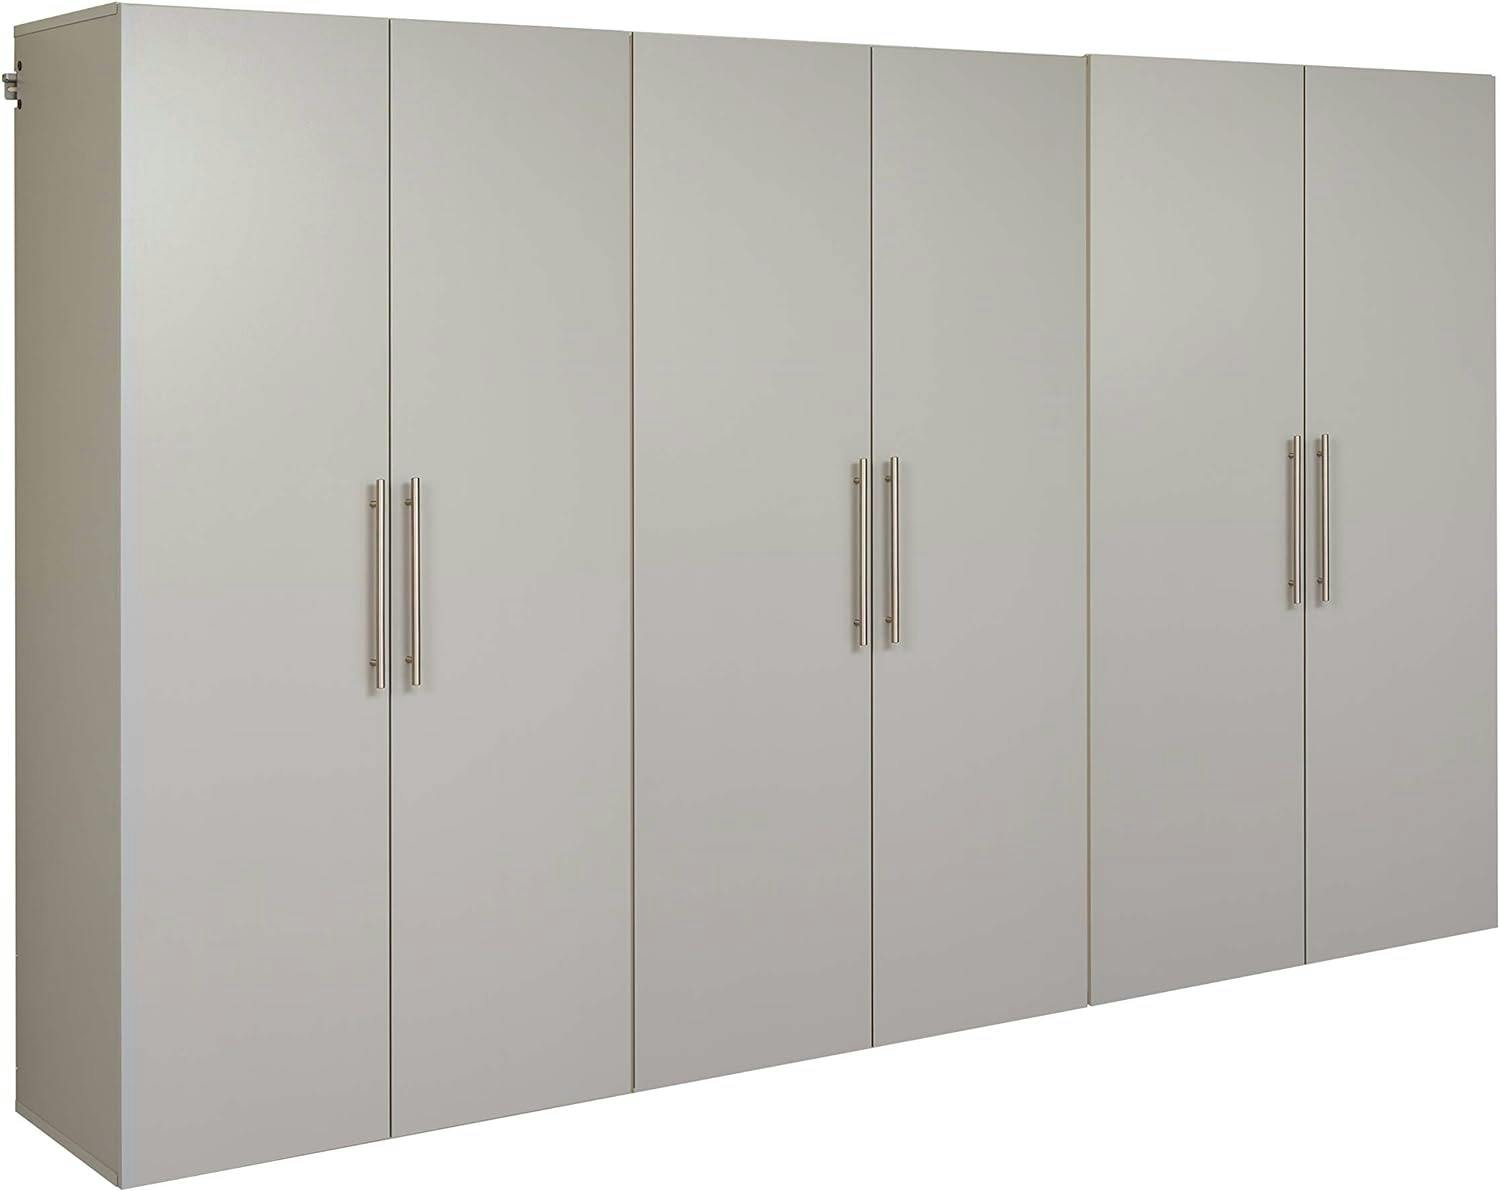 Light Gray Wall-Mounted Office Cabinet with Adjustable Shelving